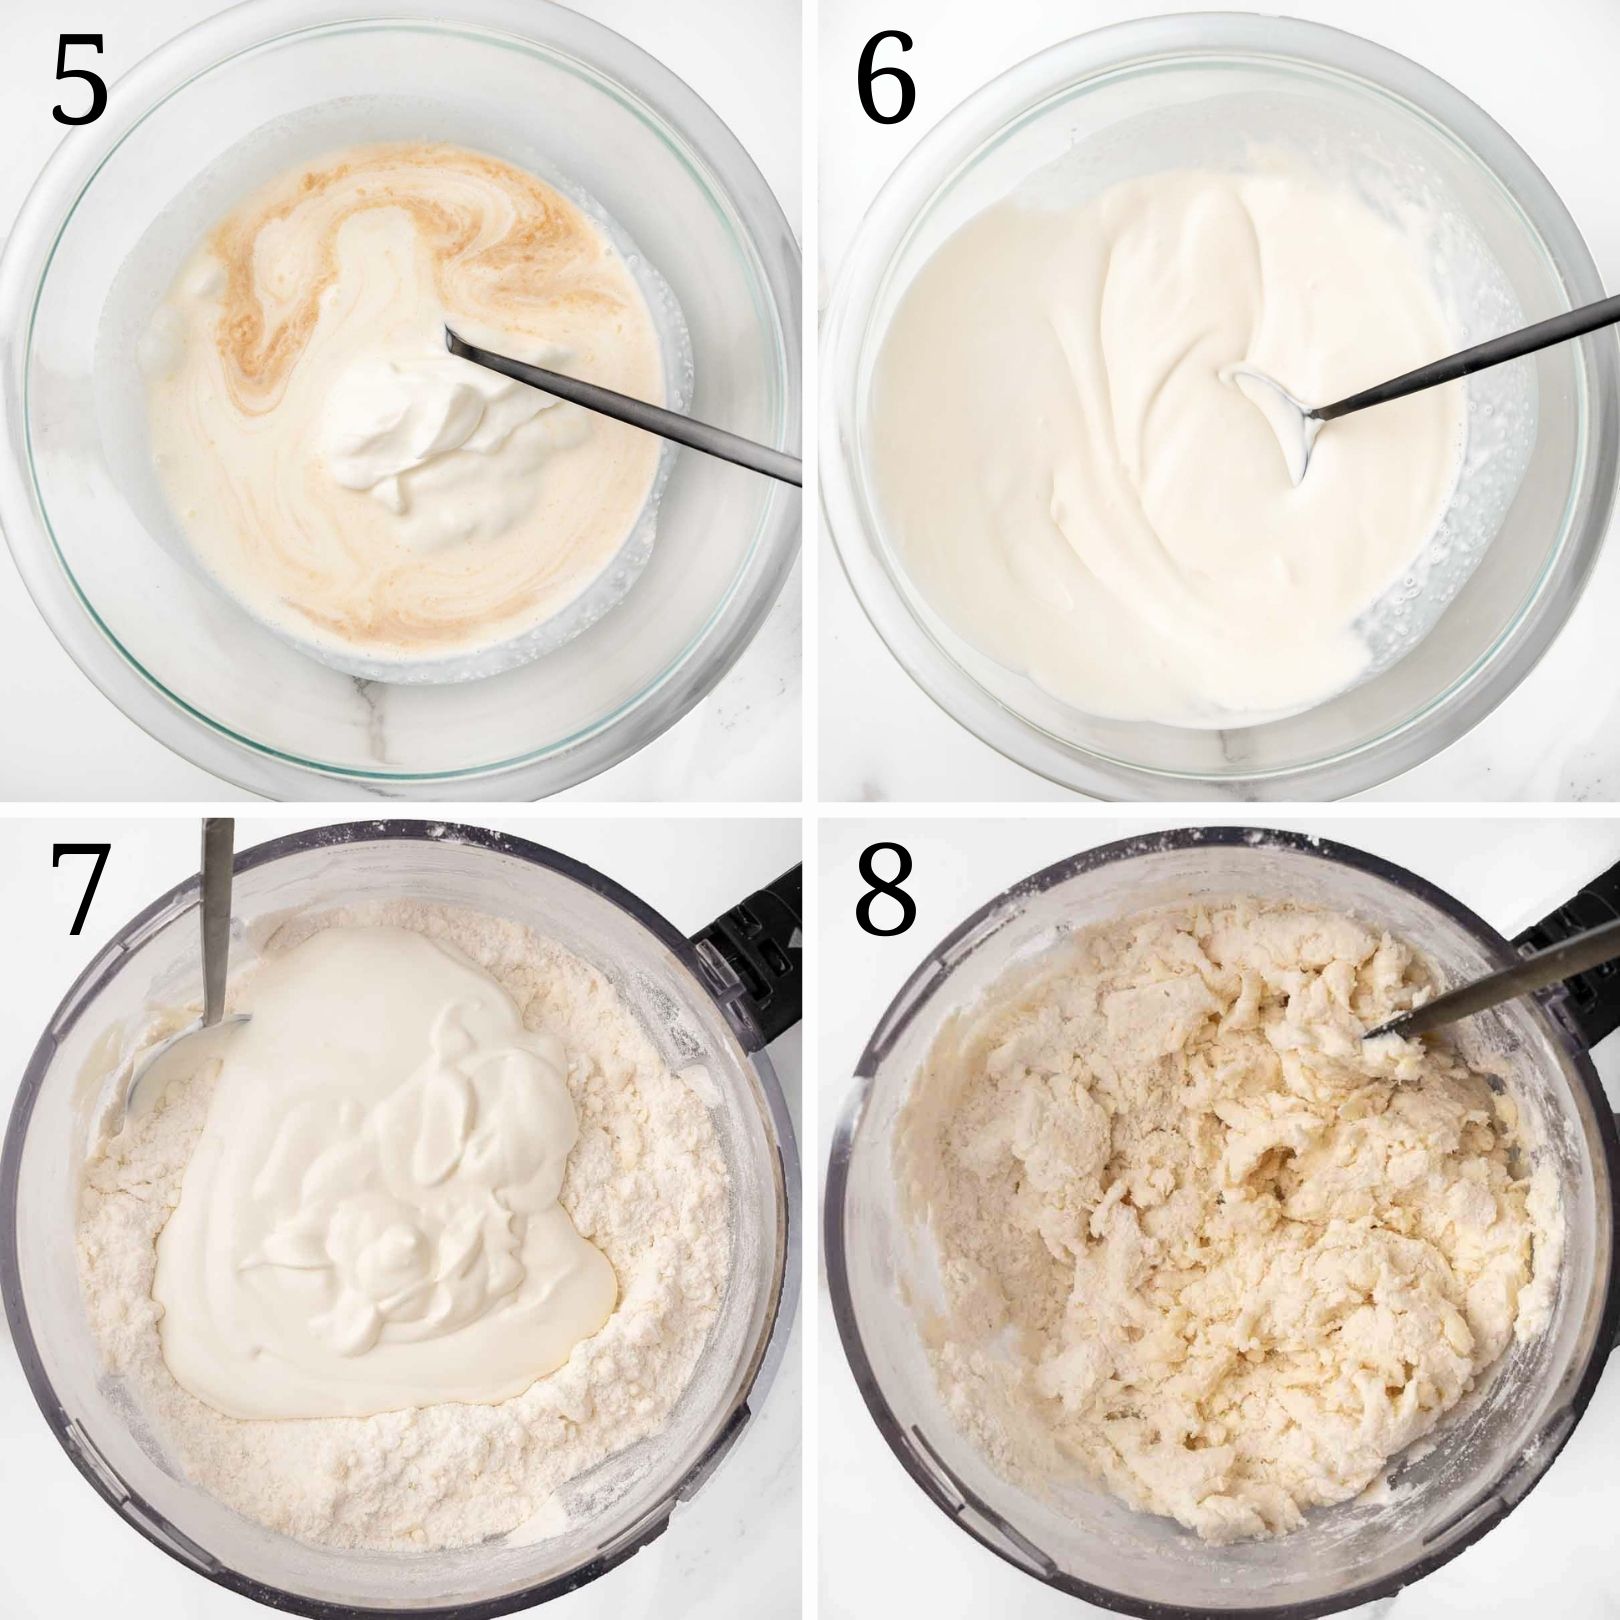 four images showing how to finish making the scone dough.